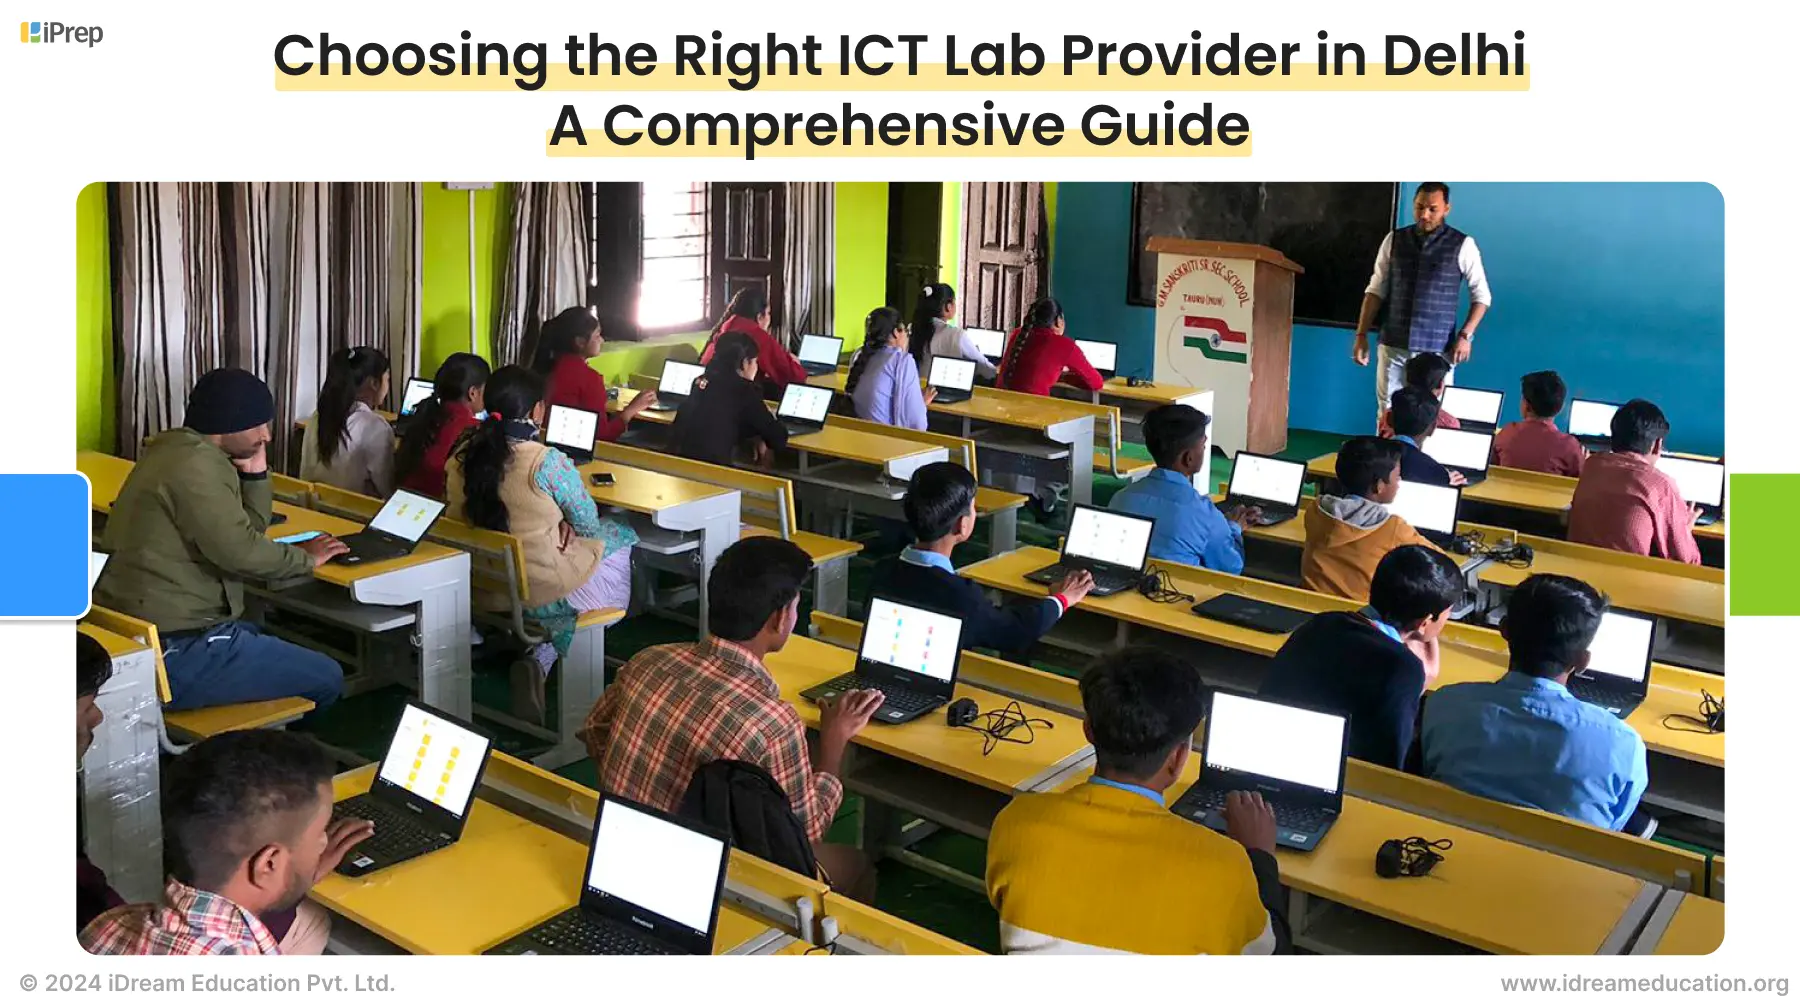 A visual representation of how ICT lab providers in Delhi are reshaping the school learning environment